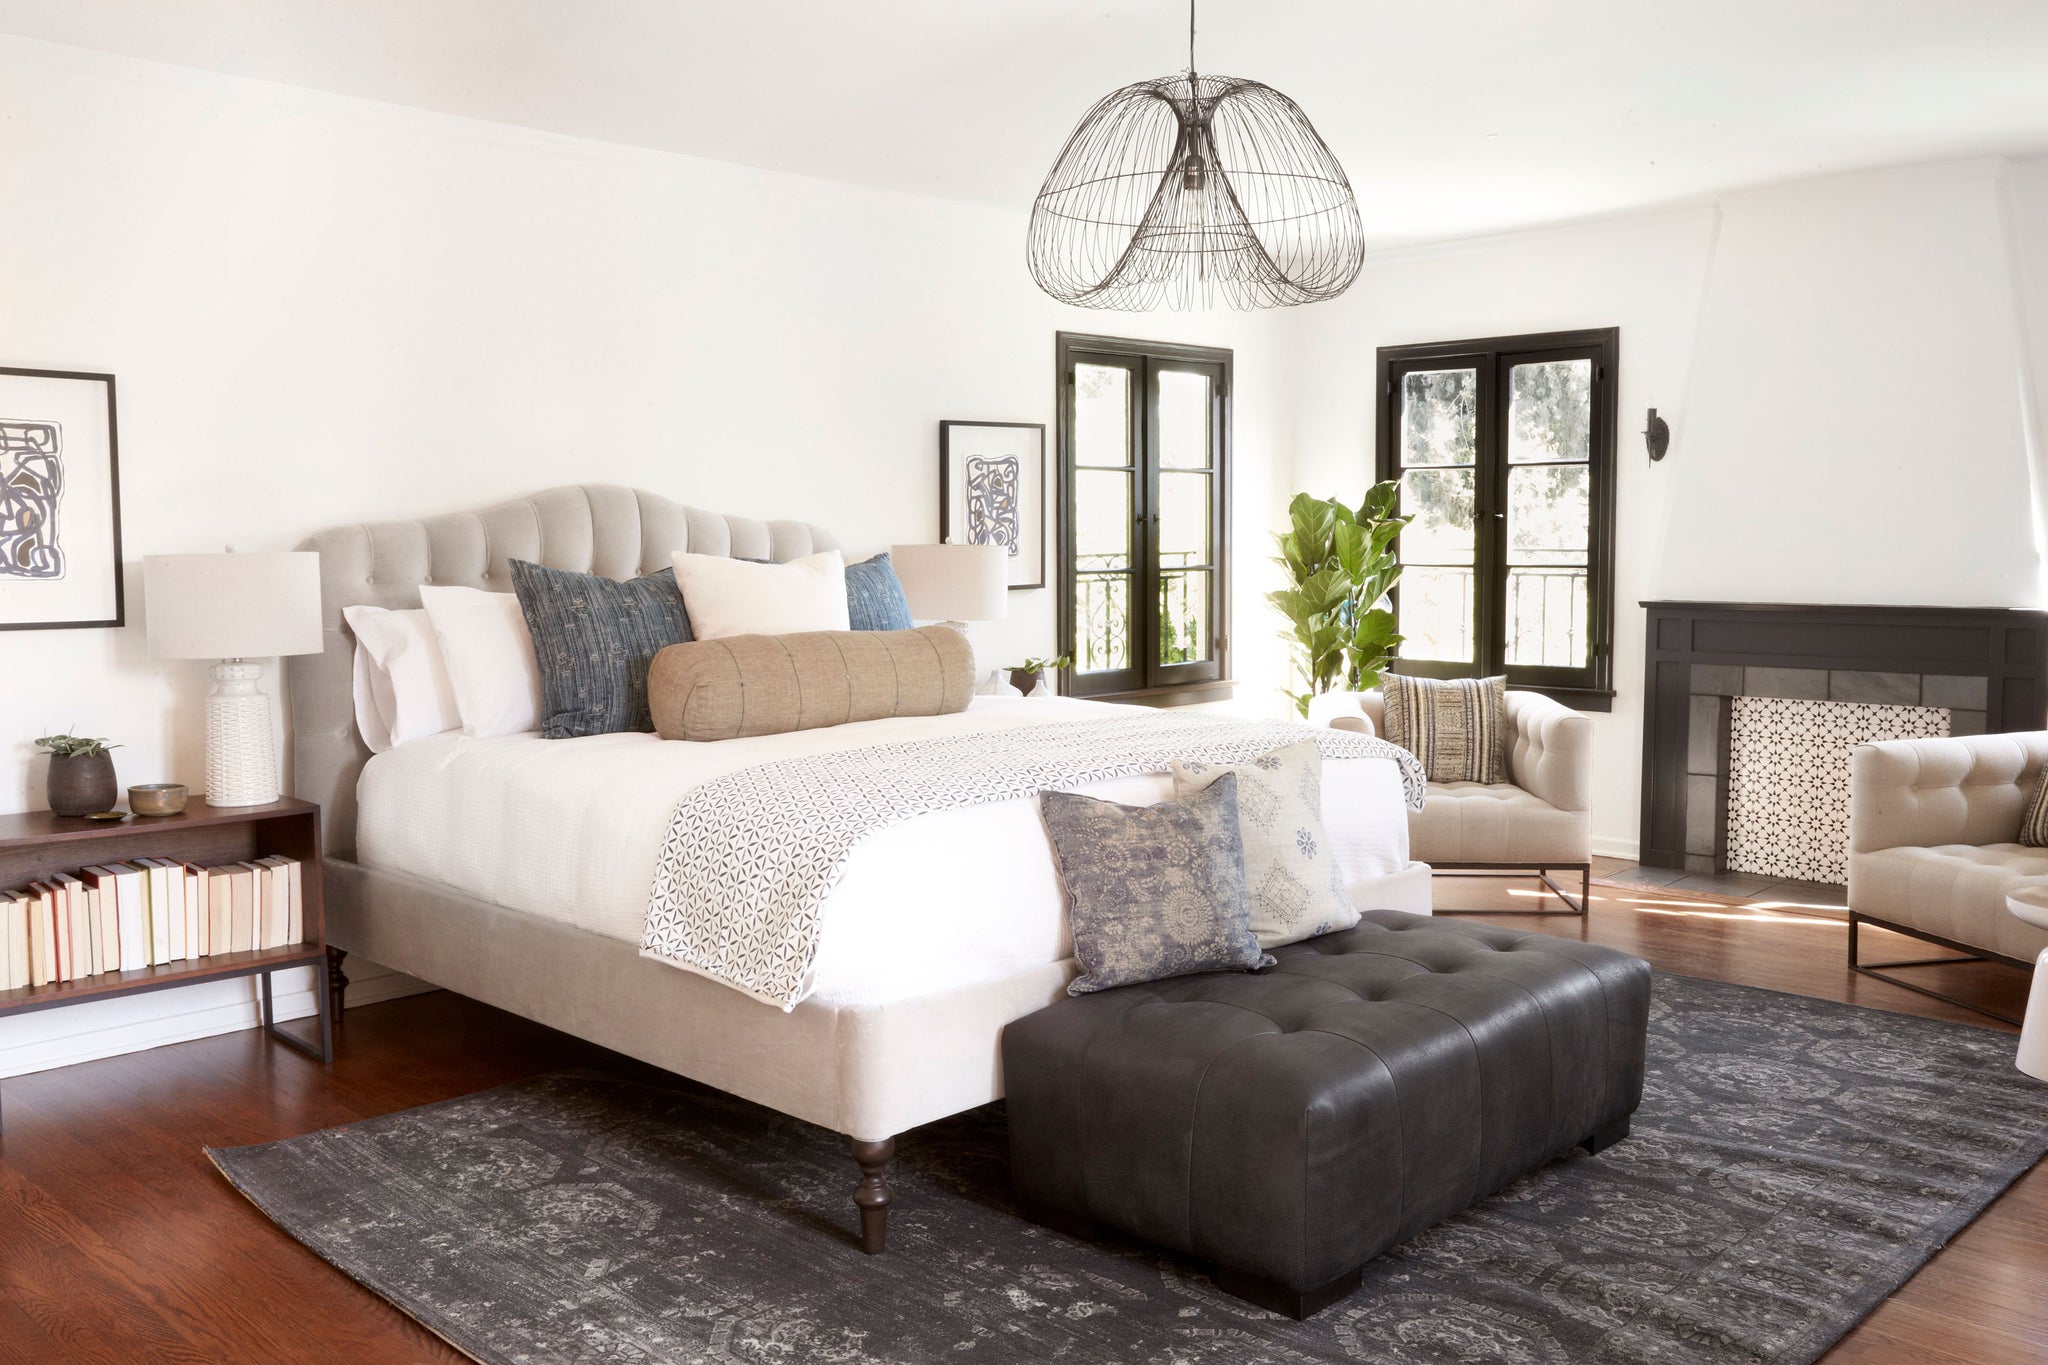  O'hara bed in Matteo Stone next to two chairs and an ottoman at the end of the bed. In the background is a white room with two windows. Above the room hangs a chandelier. Photographed in Mateo Stone. 